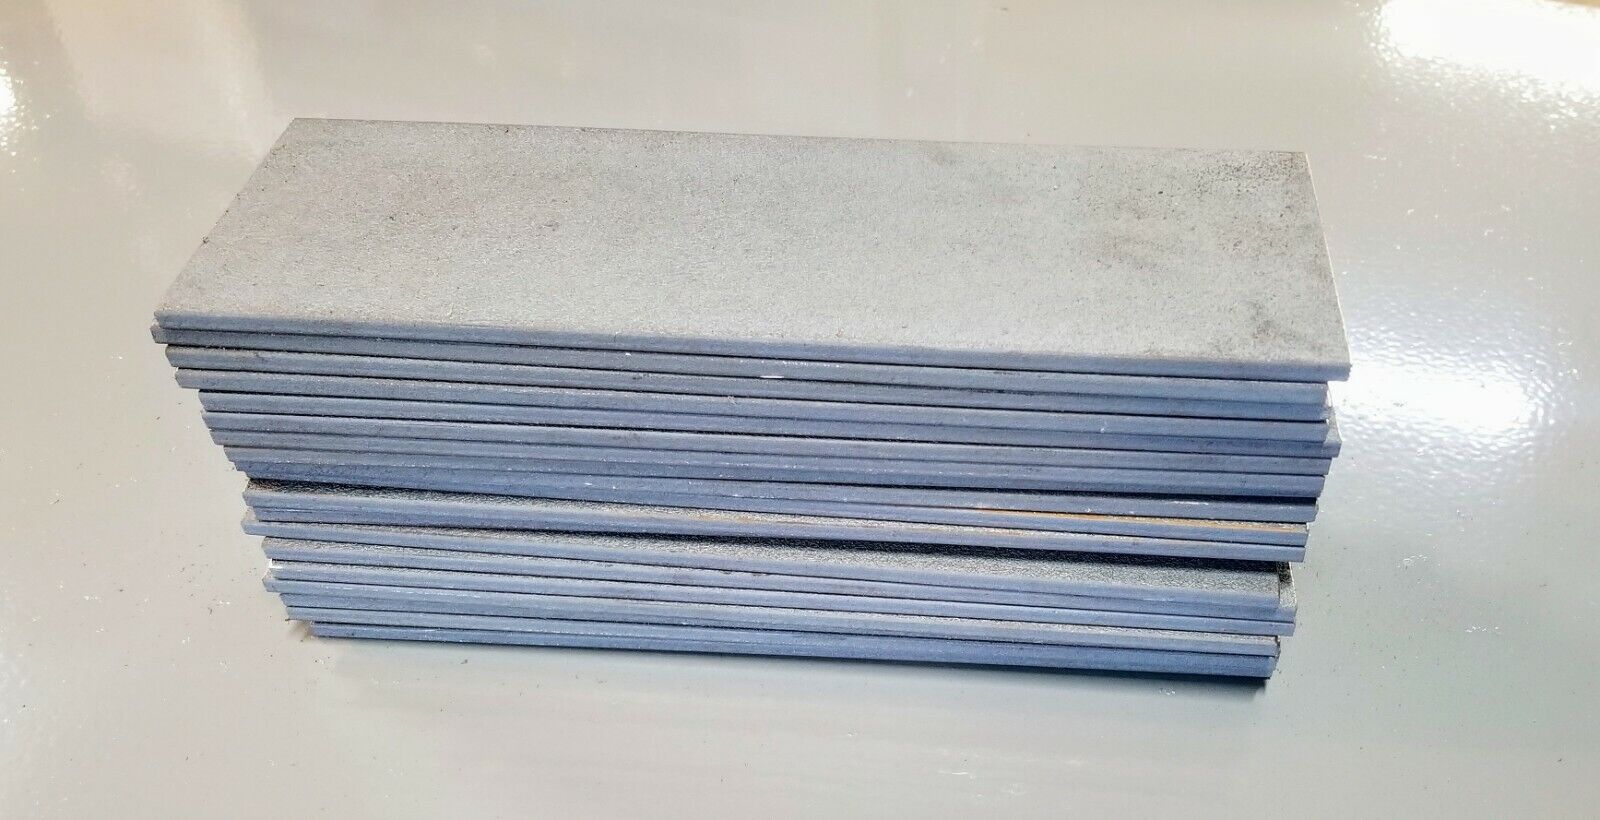 Online Metal Supply 1018 Cold Finished Steel Rectangle Bar 3//8 x 8 x 12